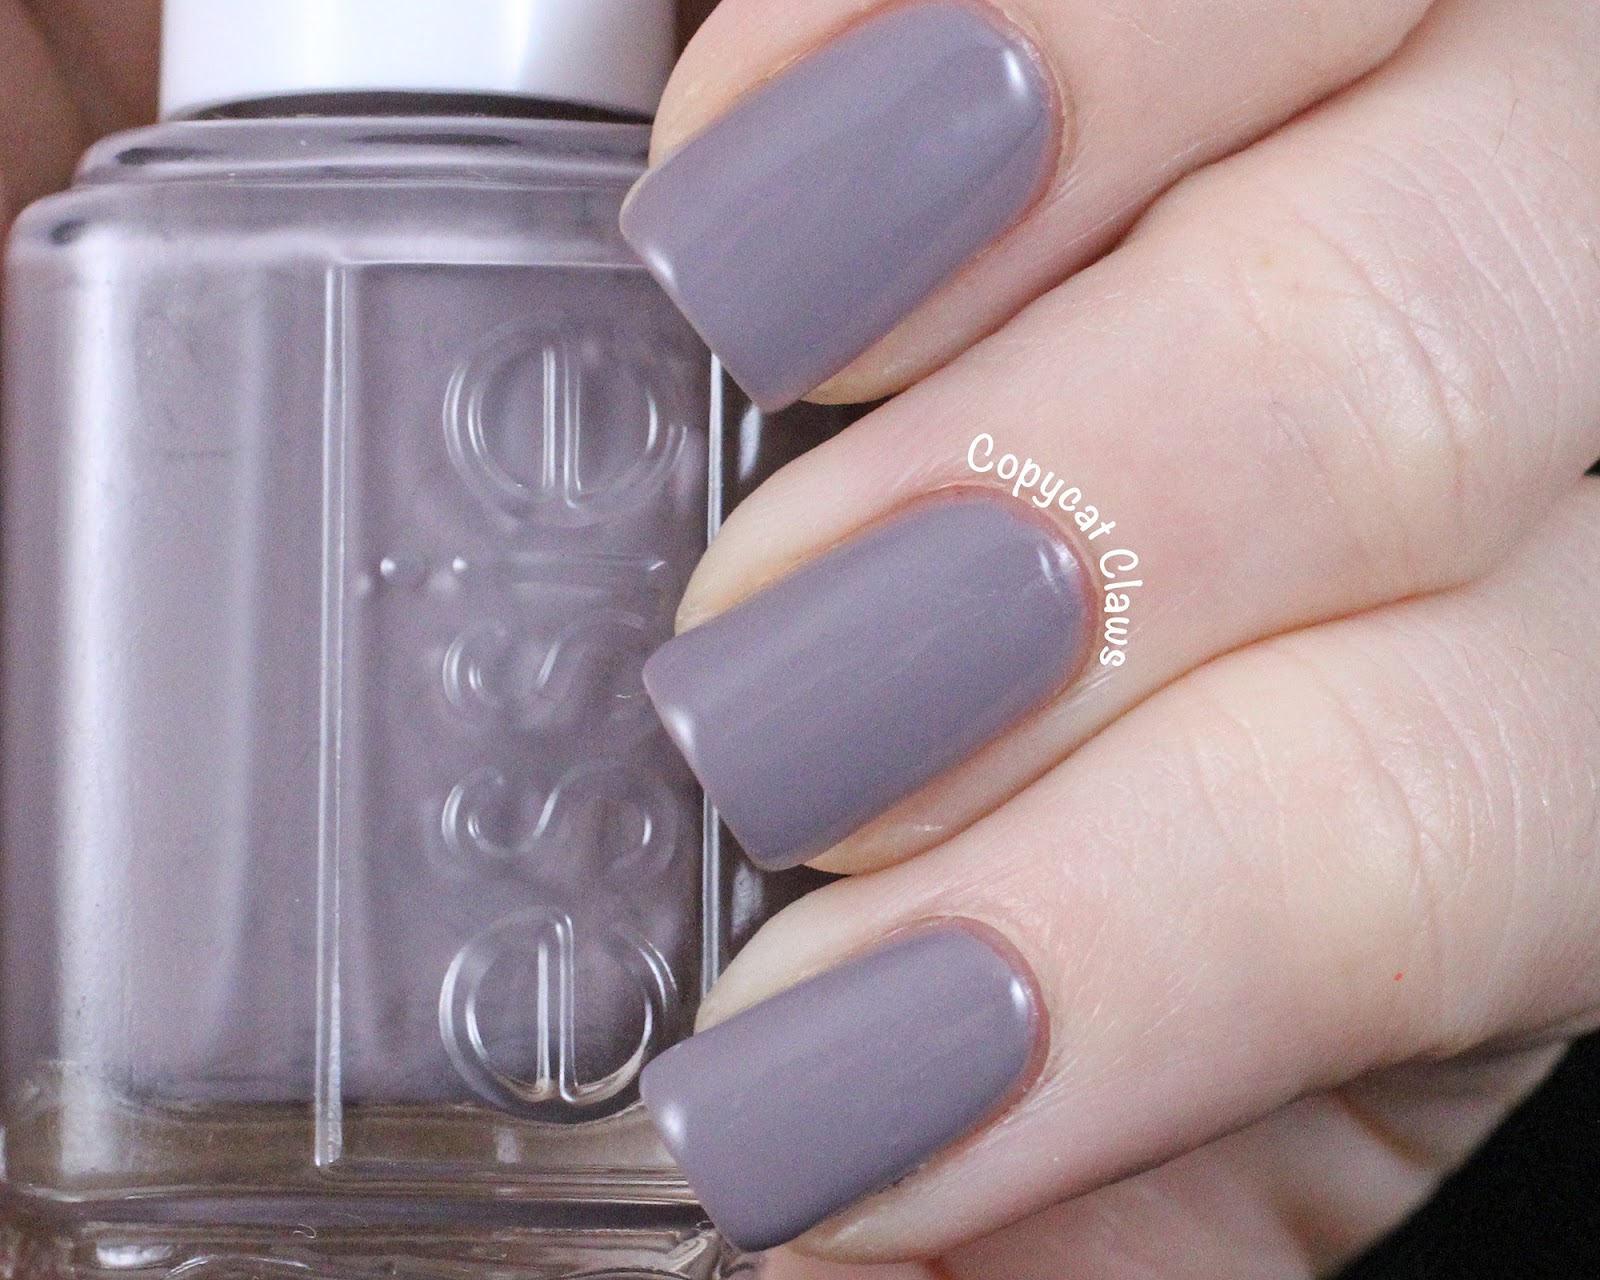 9. Essie Nail Polish in "Chinchilly" - wide 2